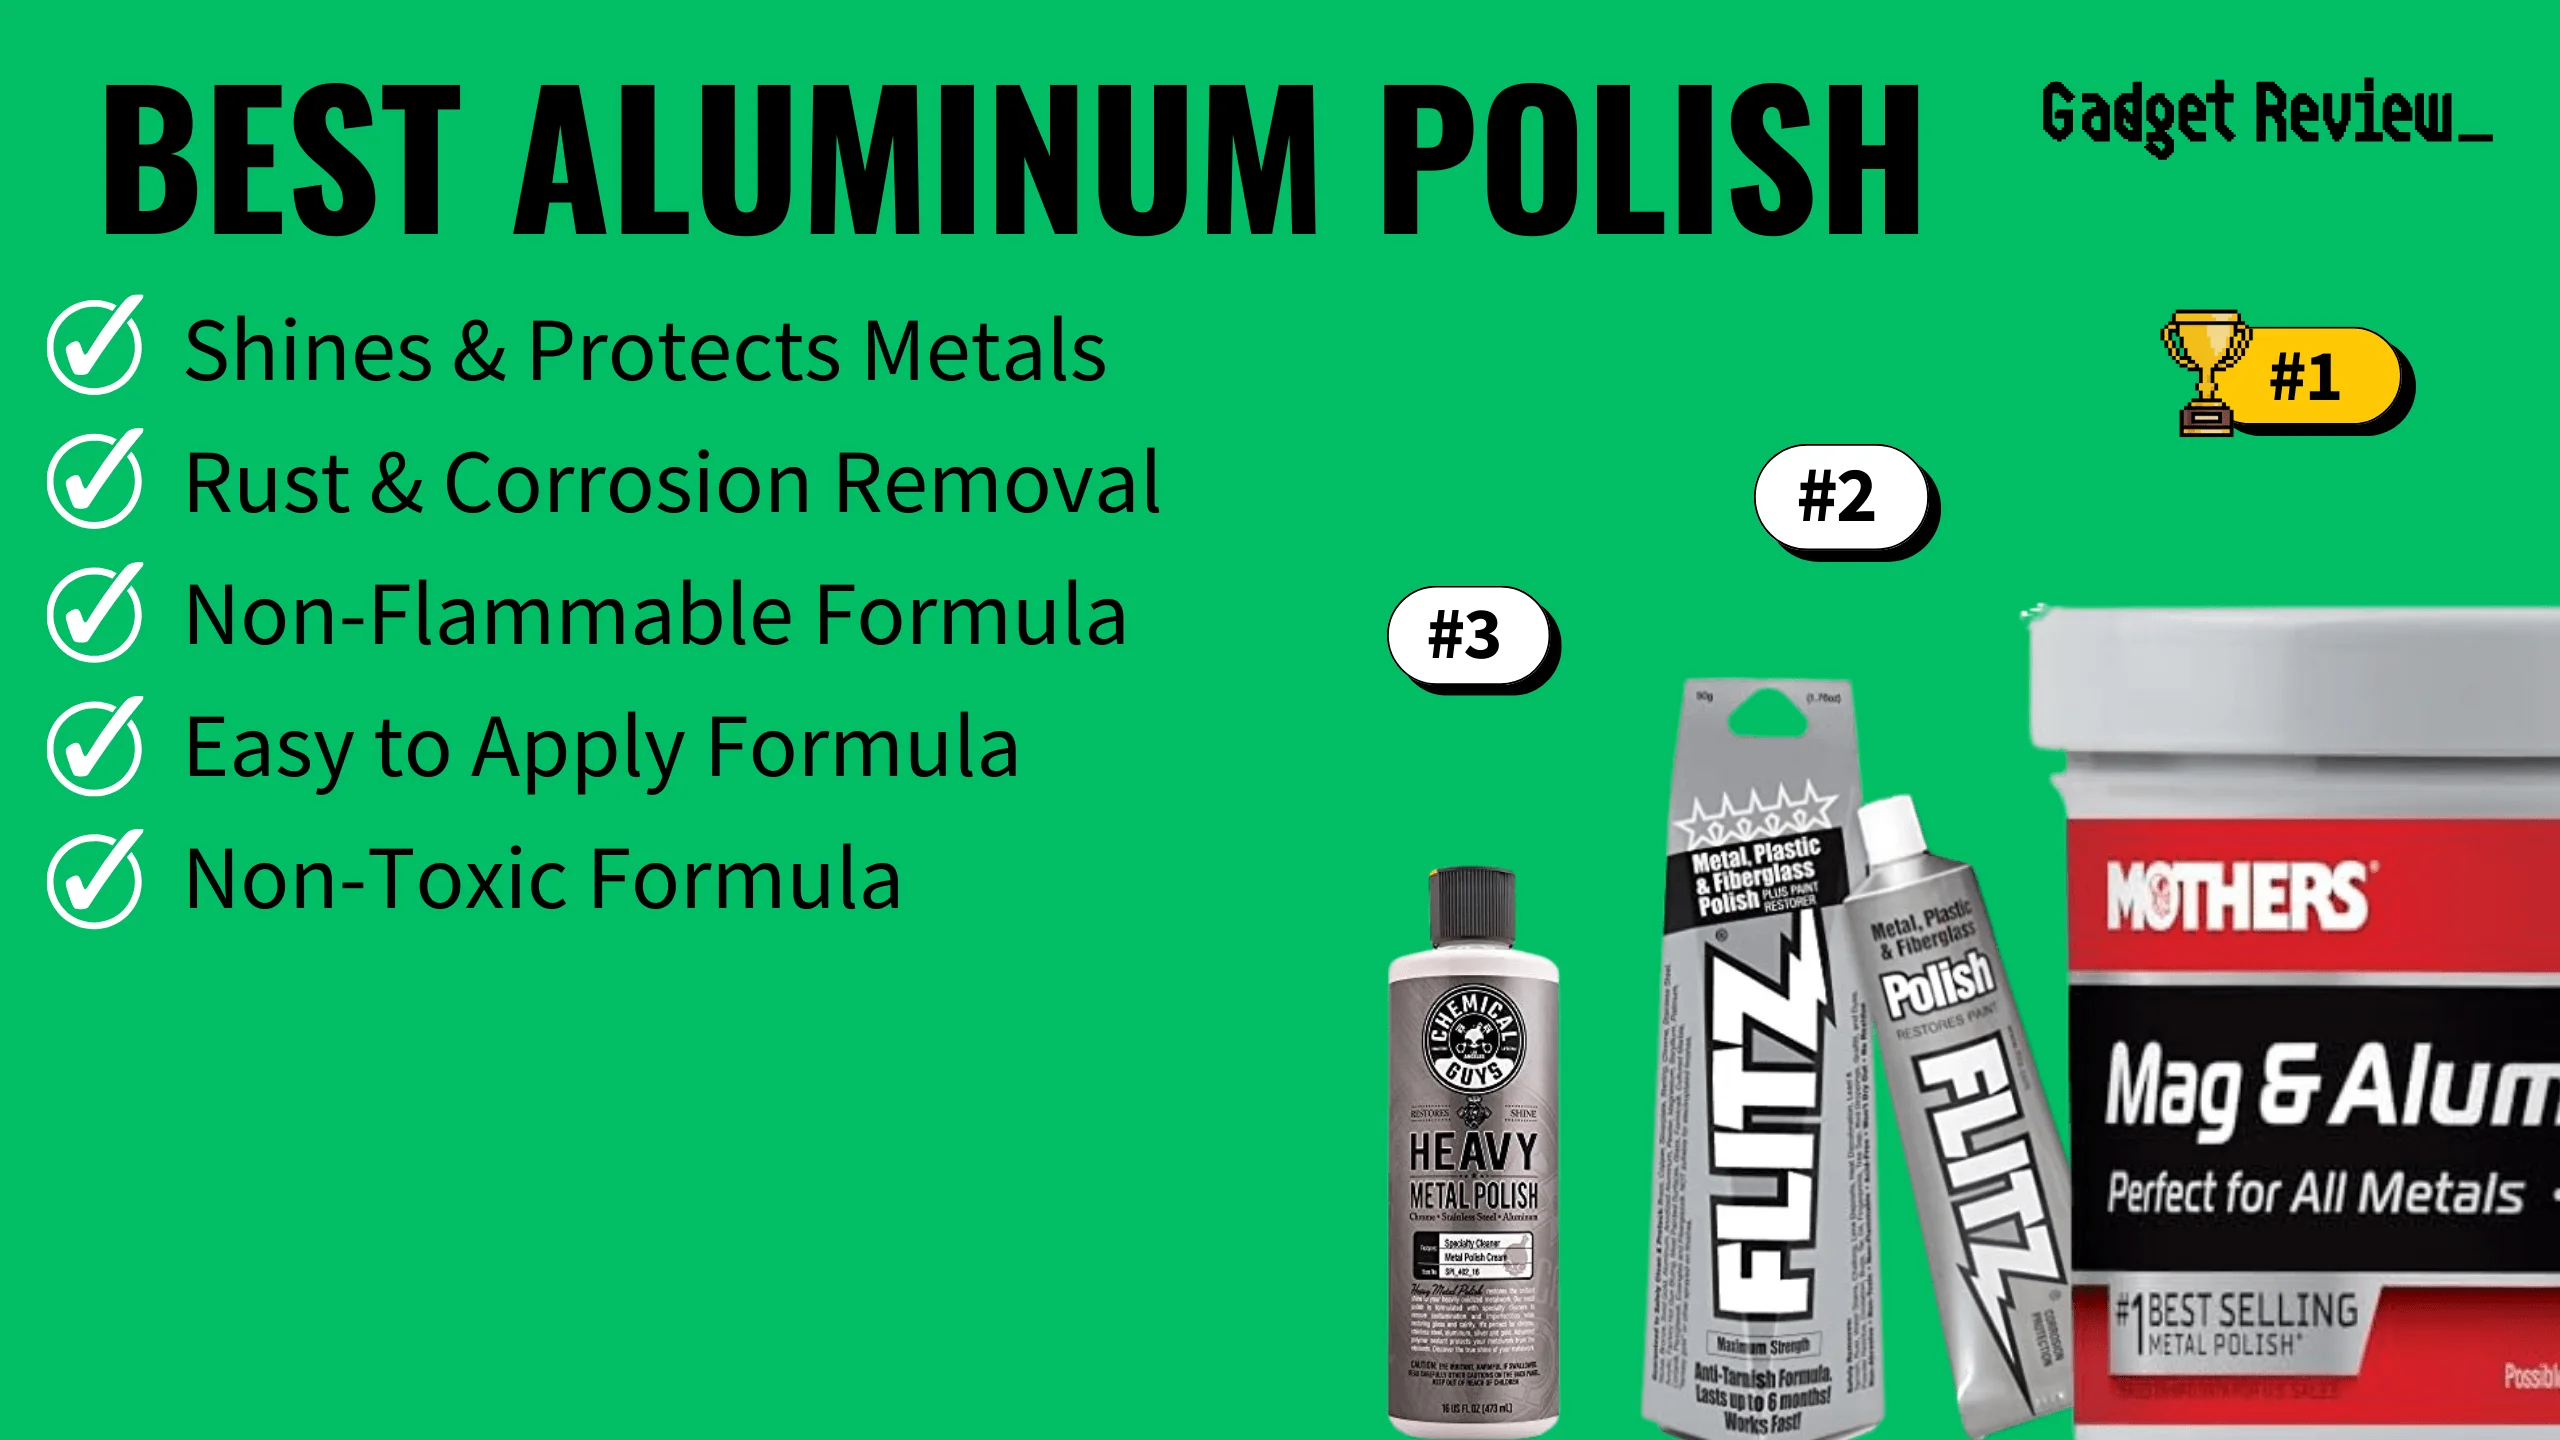 best aluminum polish featured image that shows the top three best tool models